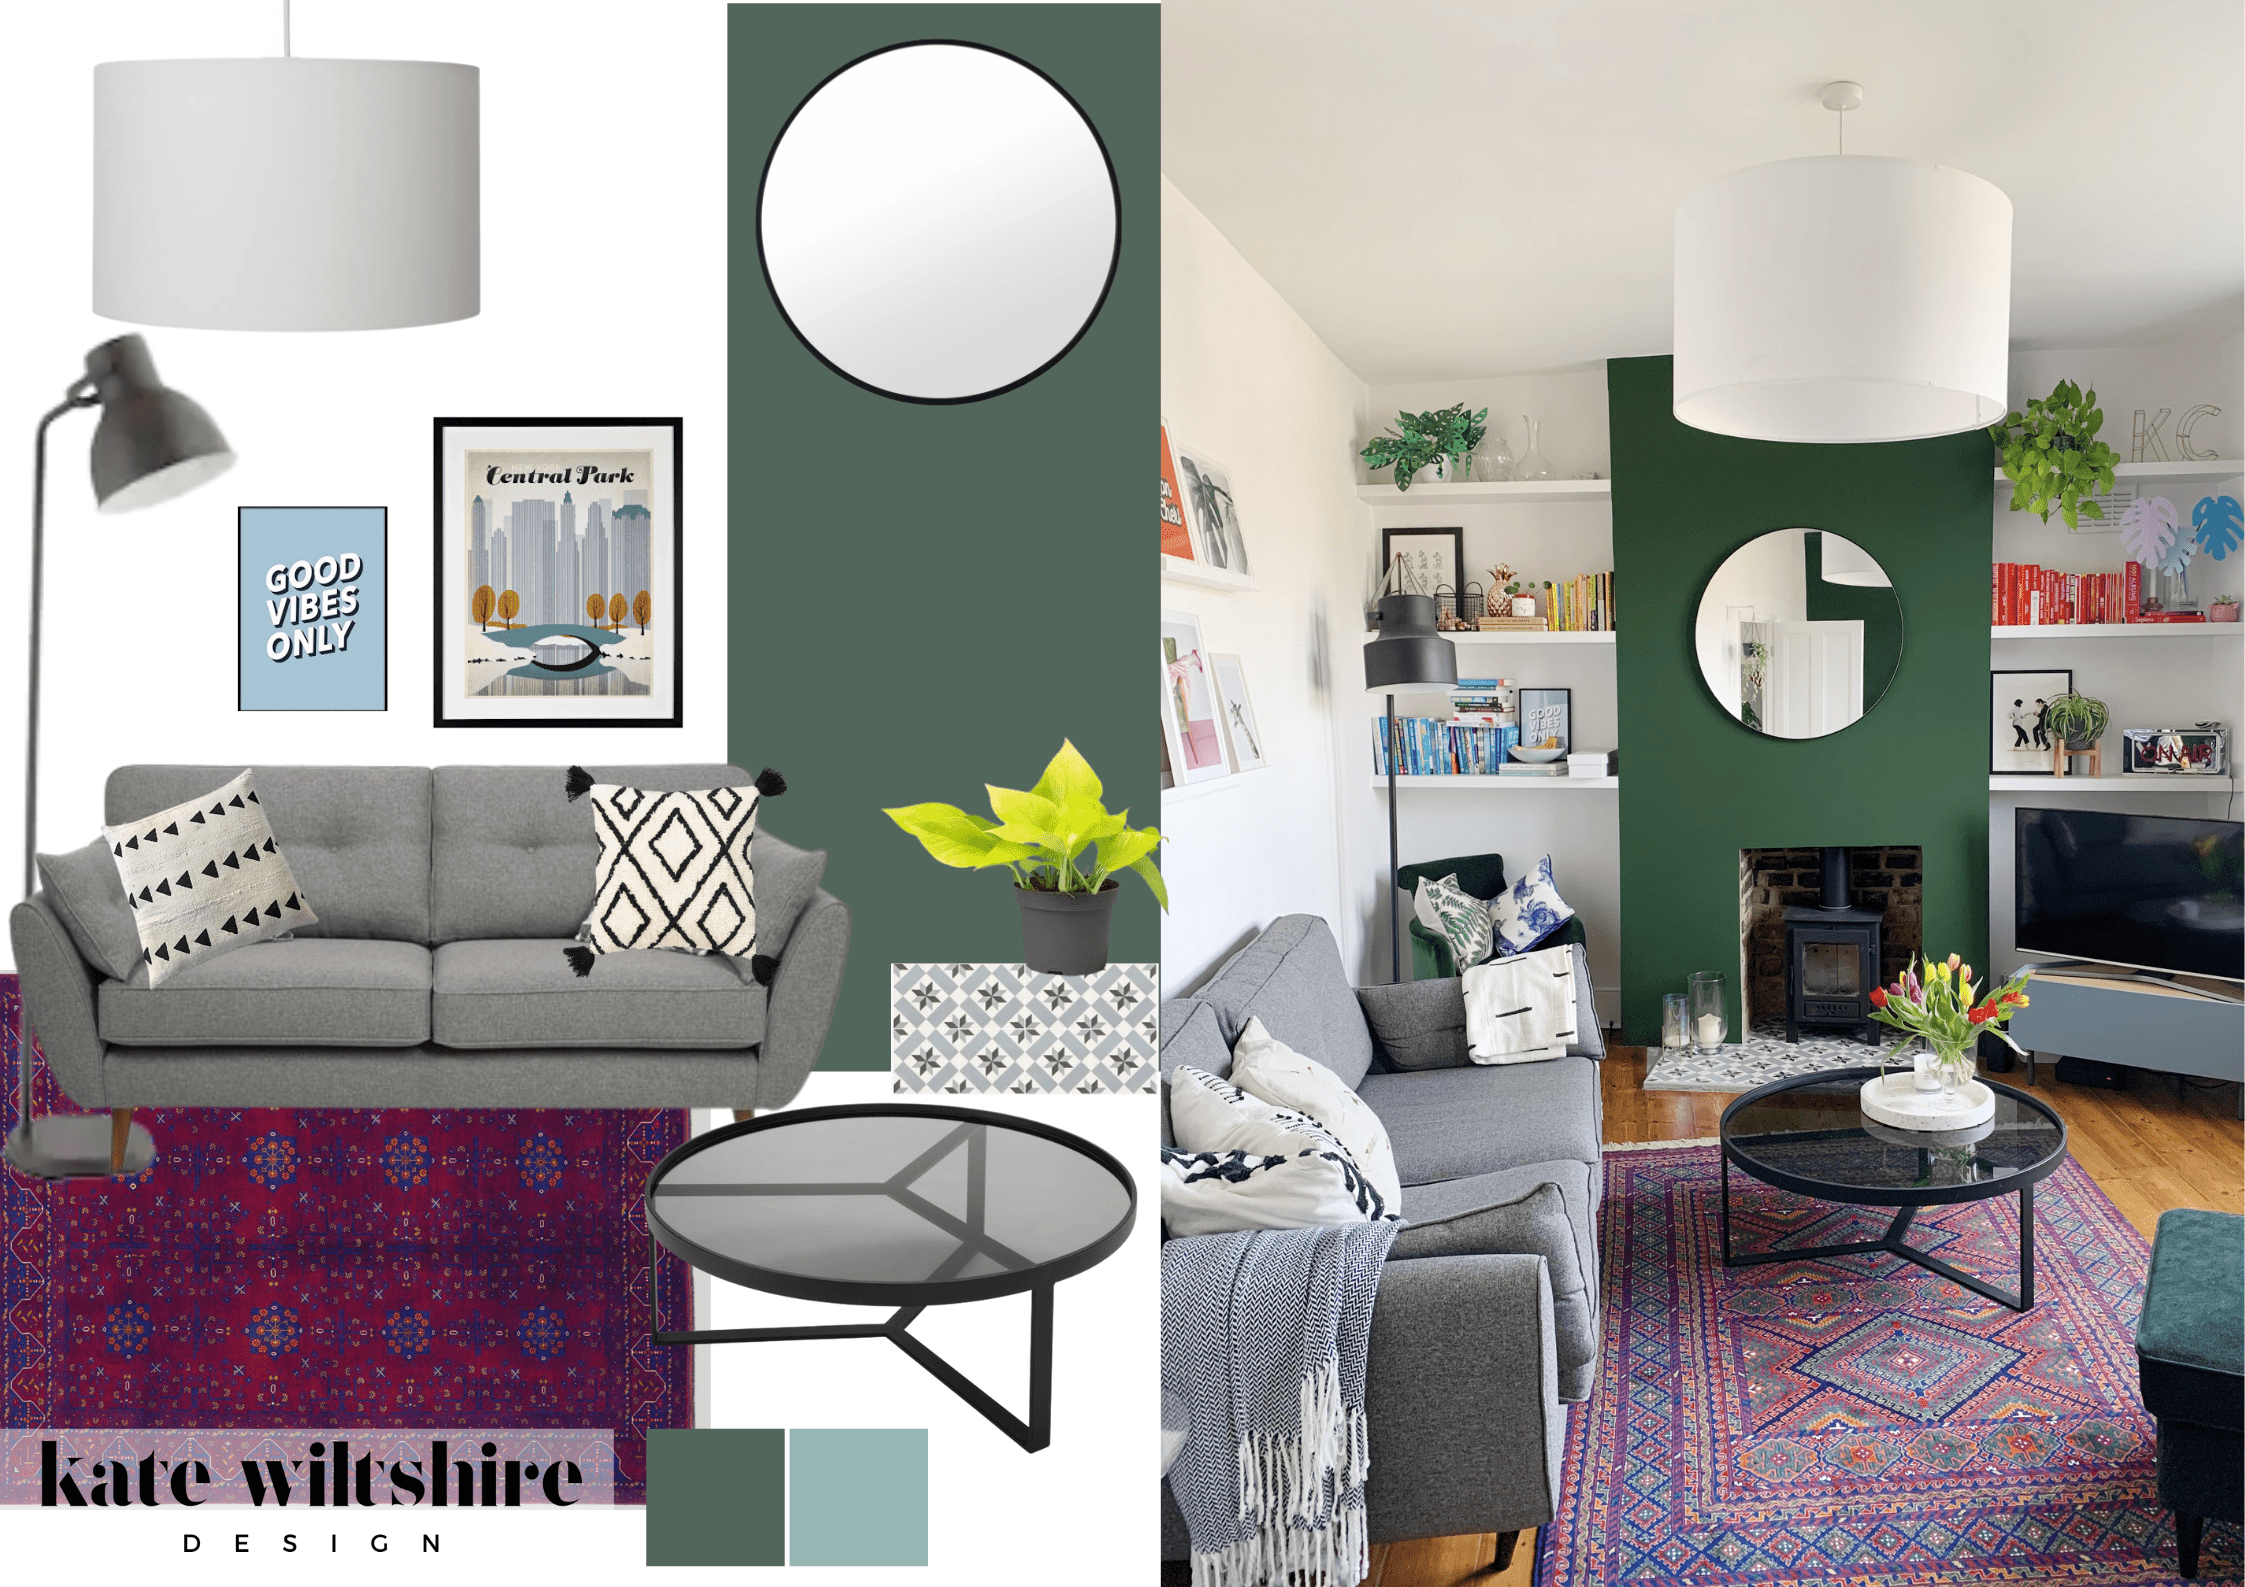 How to create a mood board | Kate Wiltshire Design